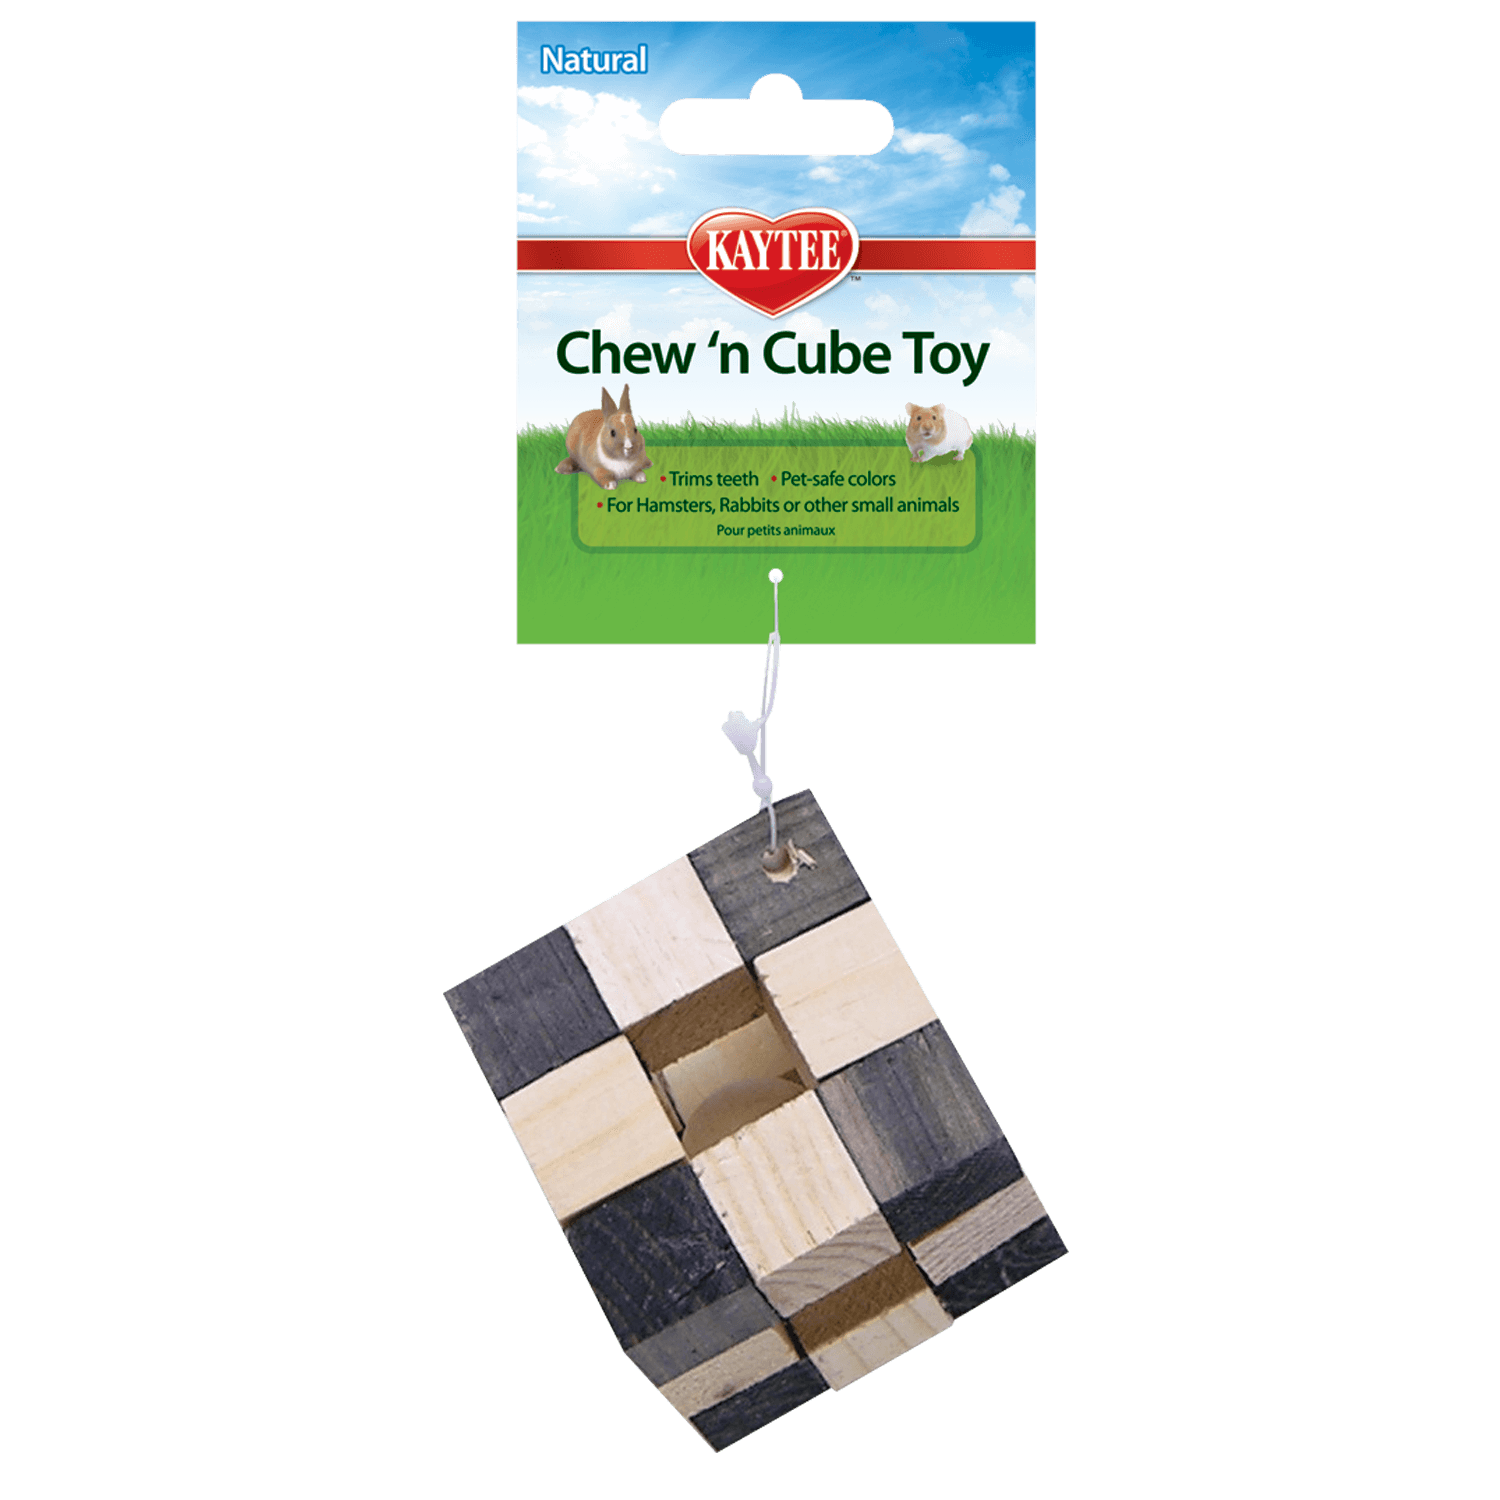 Kaytee Natural Chew-n-Cube Toy for Small Animals